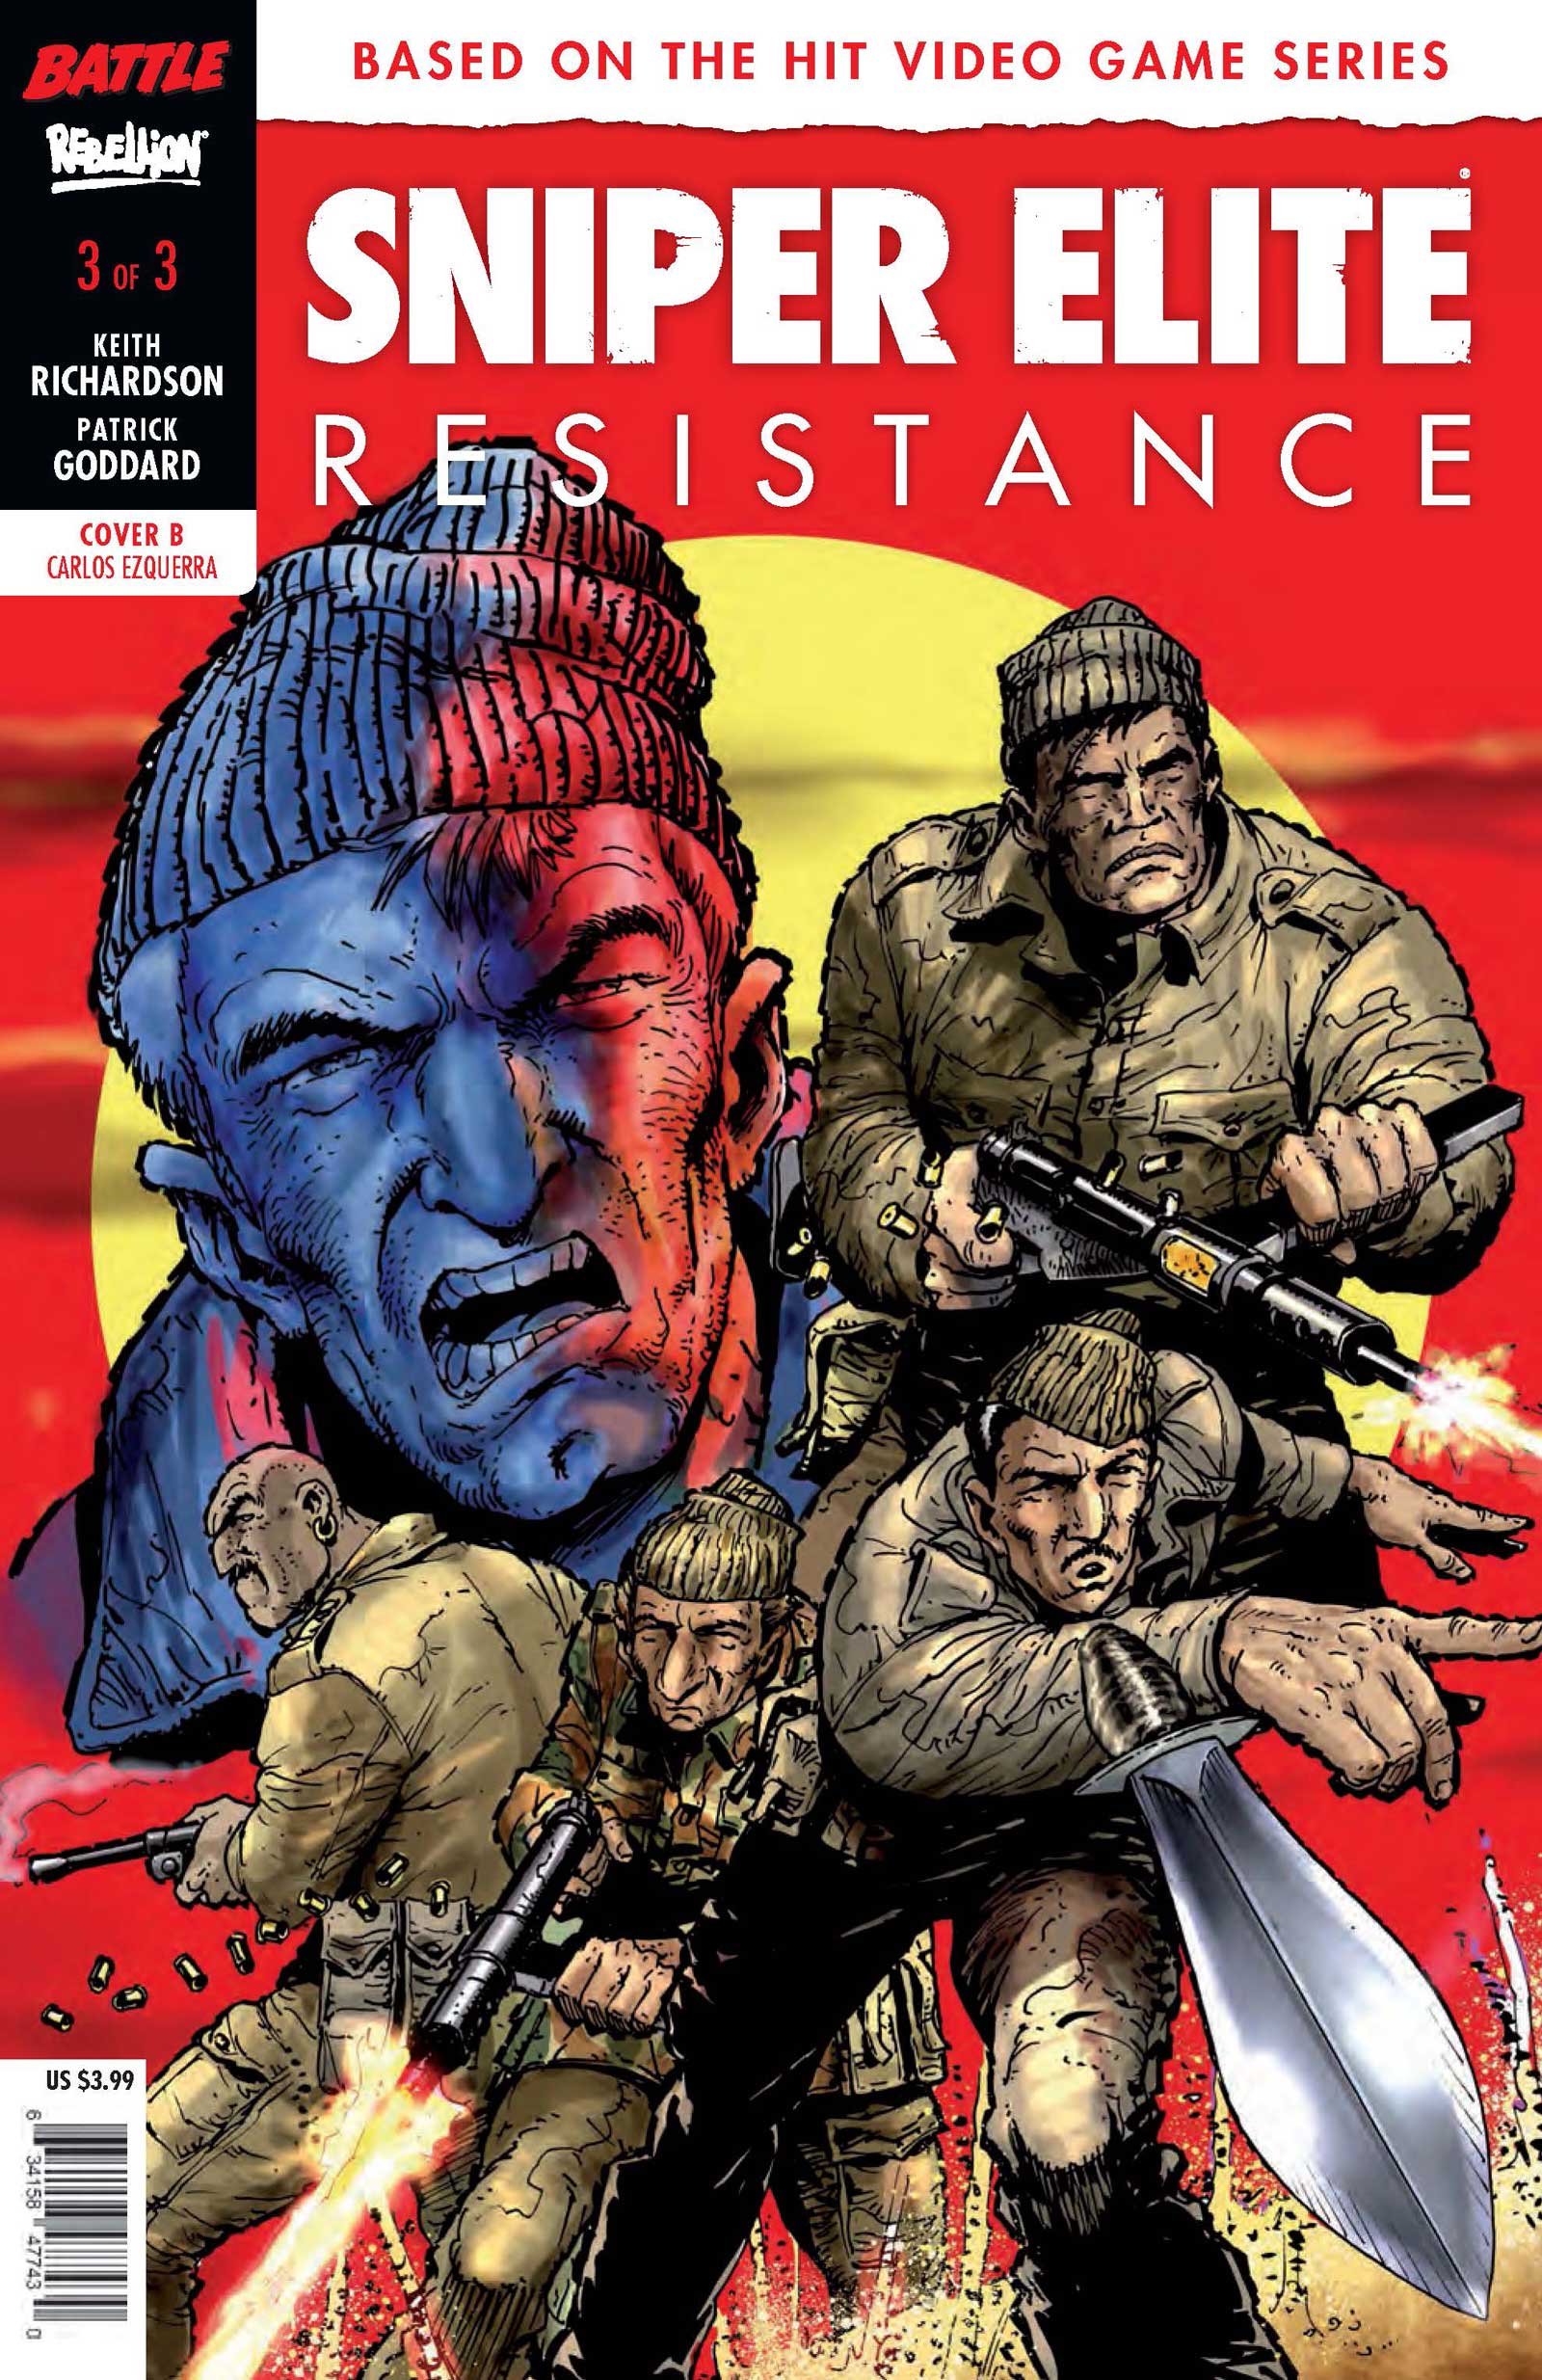 Sniper Elite - Resistance #3 - Variant Cover by Carlos Ezquerra